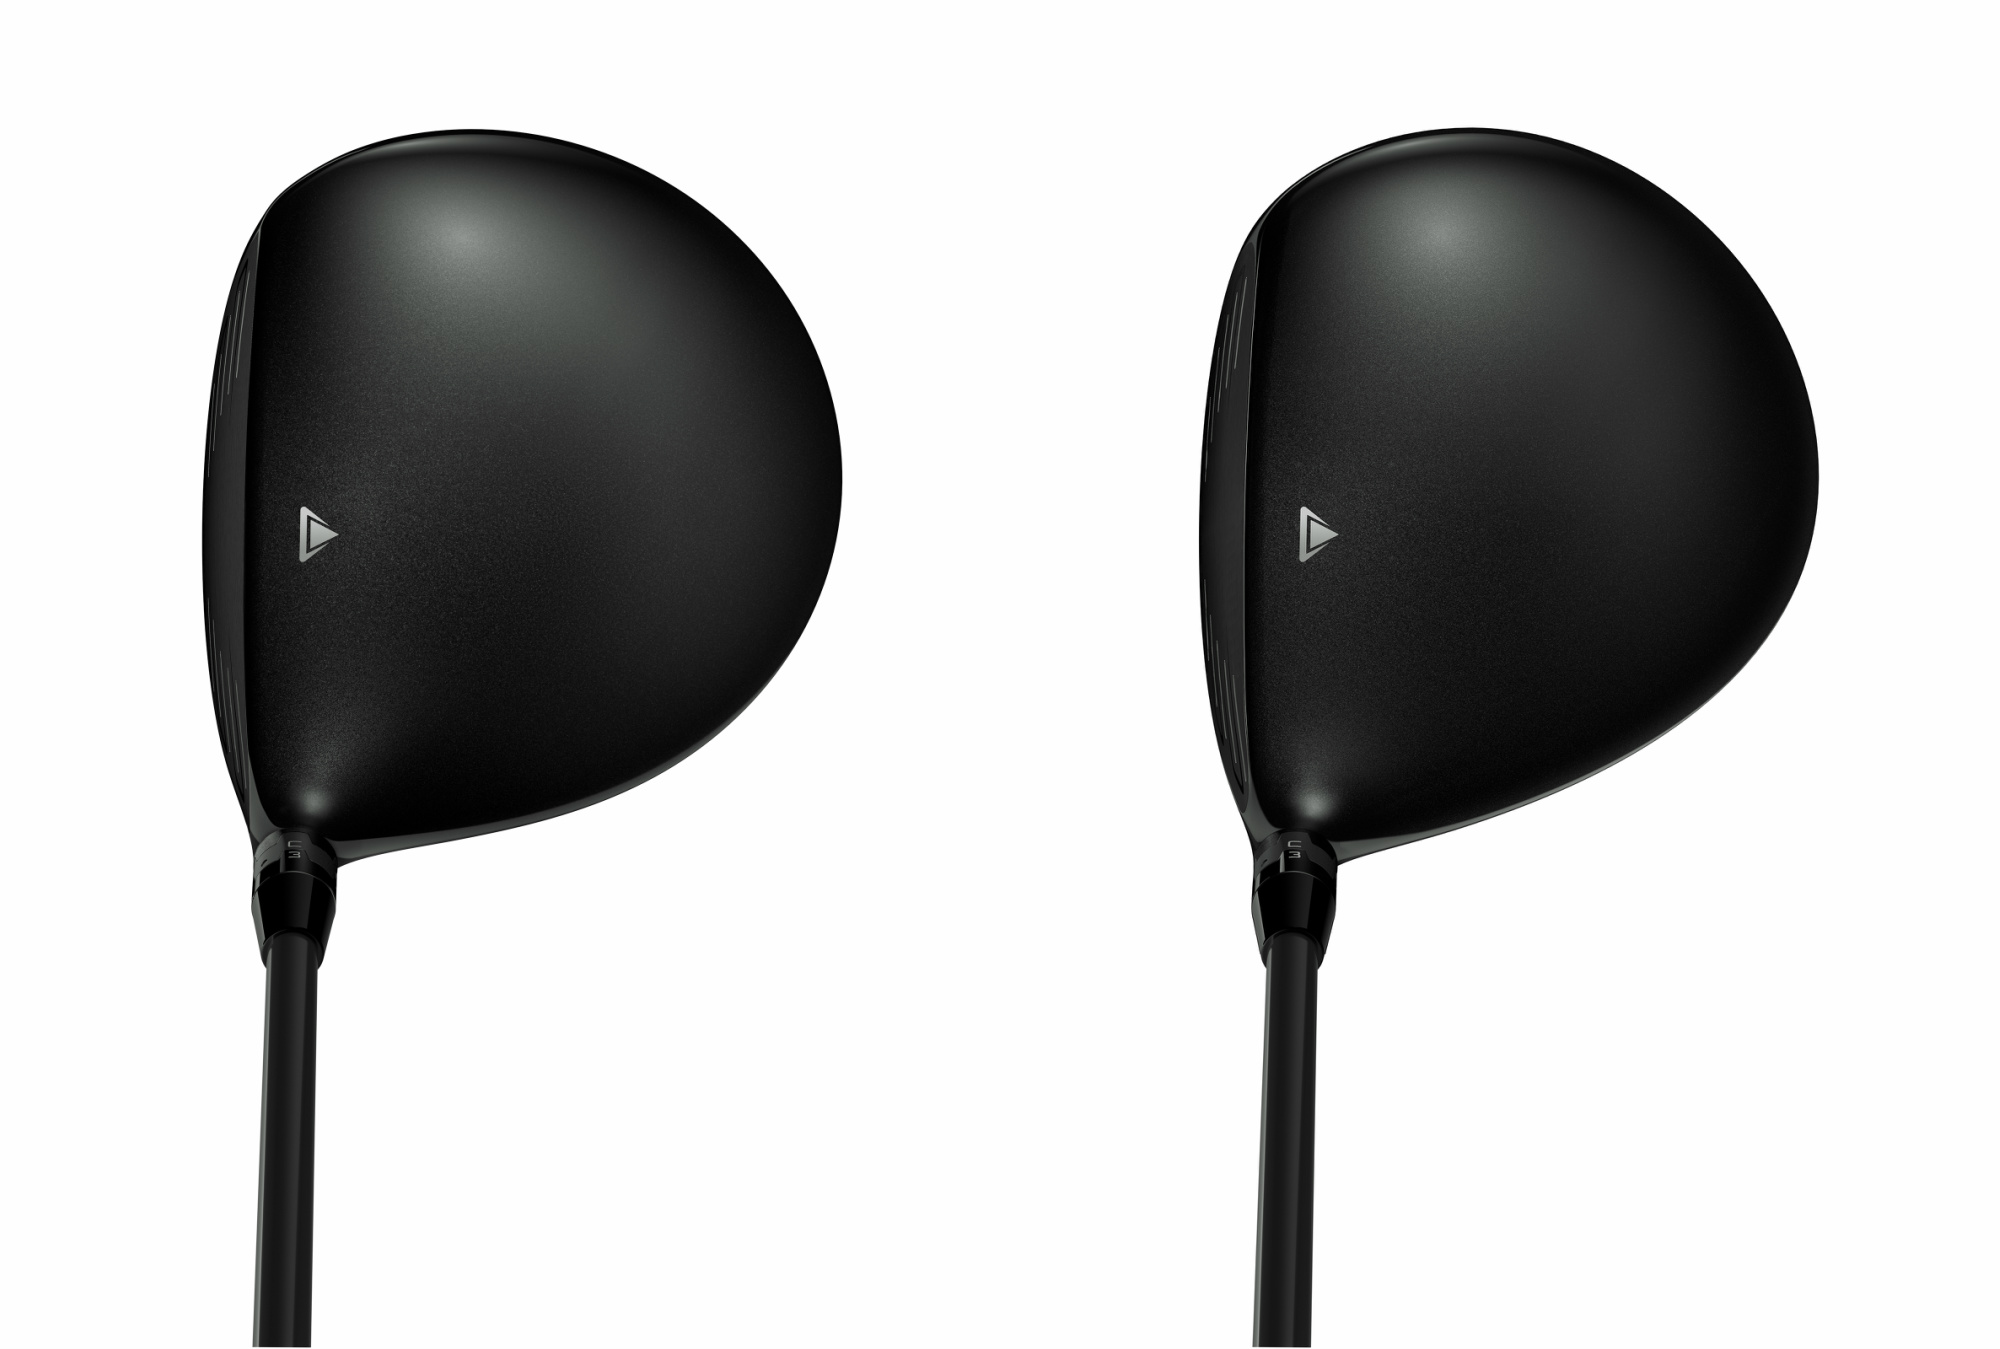 Titleist 917 D2 Driver Review: Music to our ears